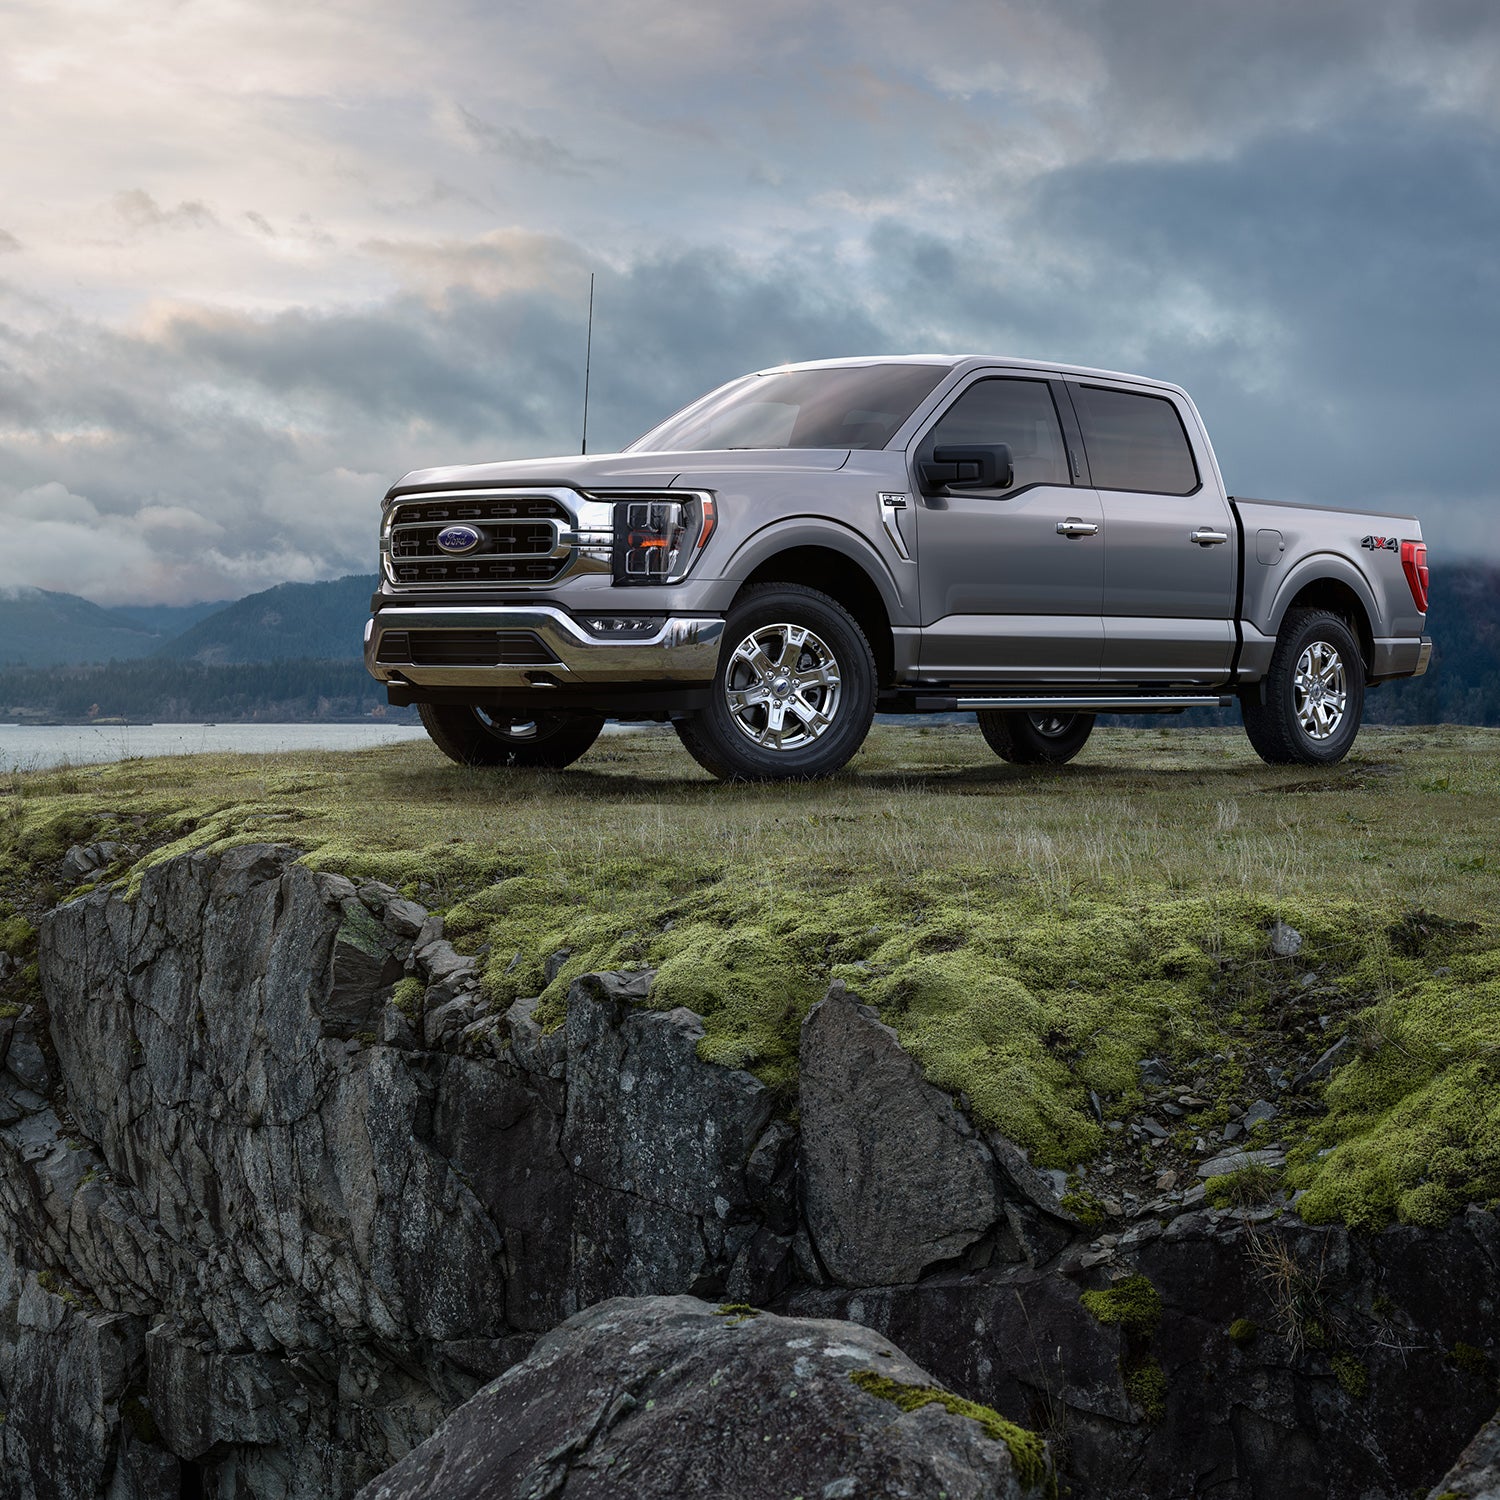 The New F-150 Is the Most Practical Adventure Vehicle